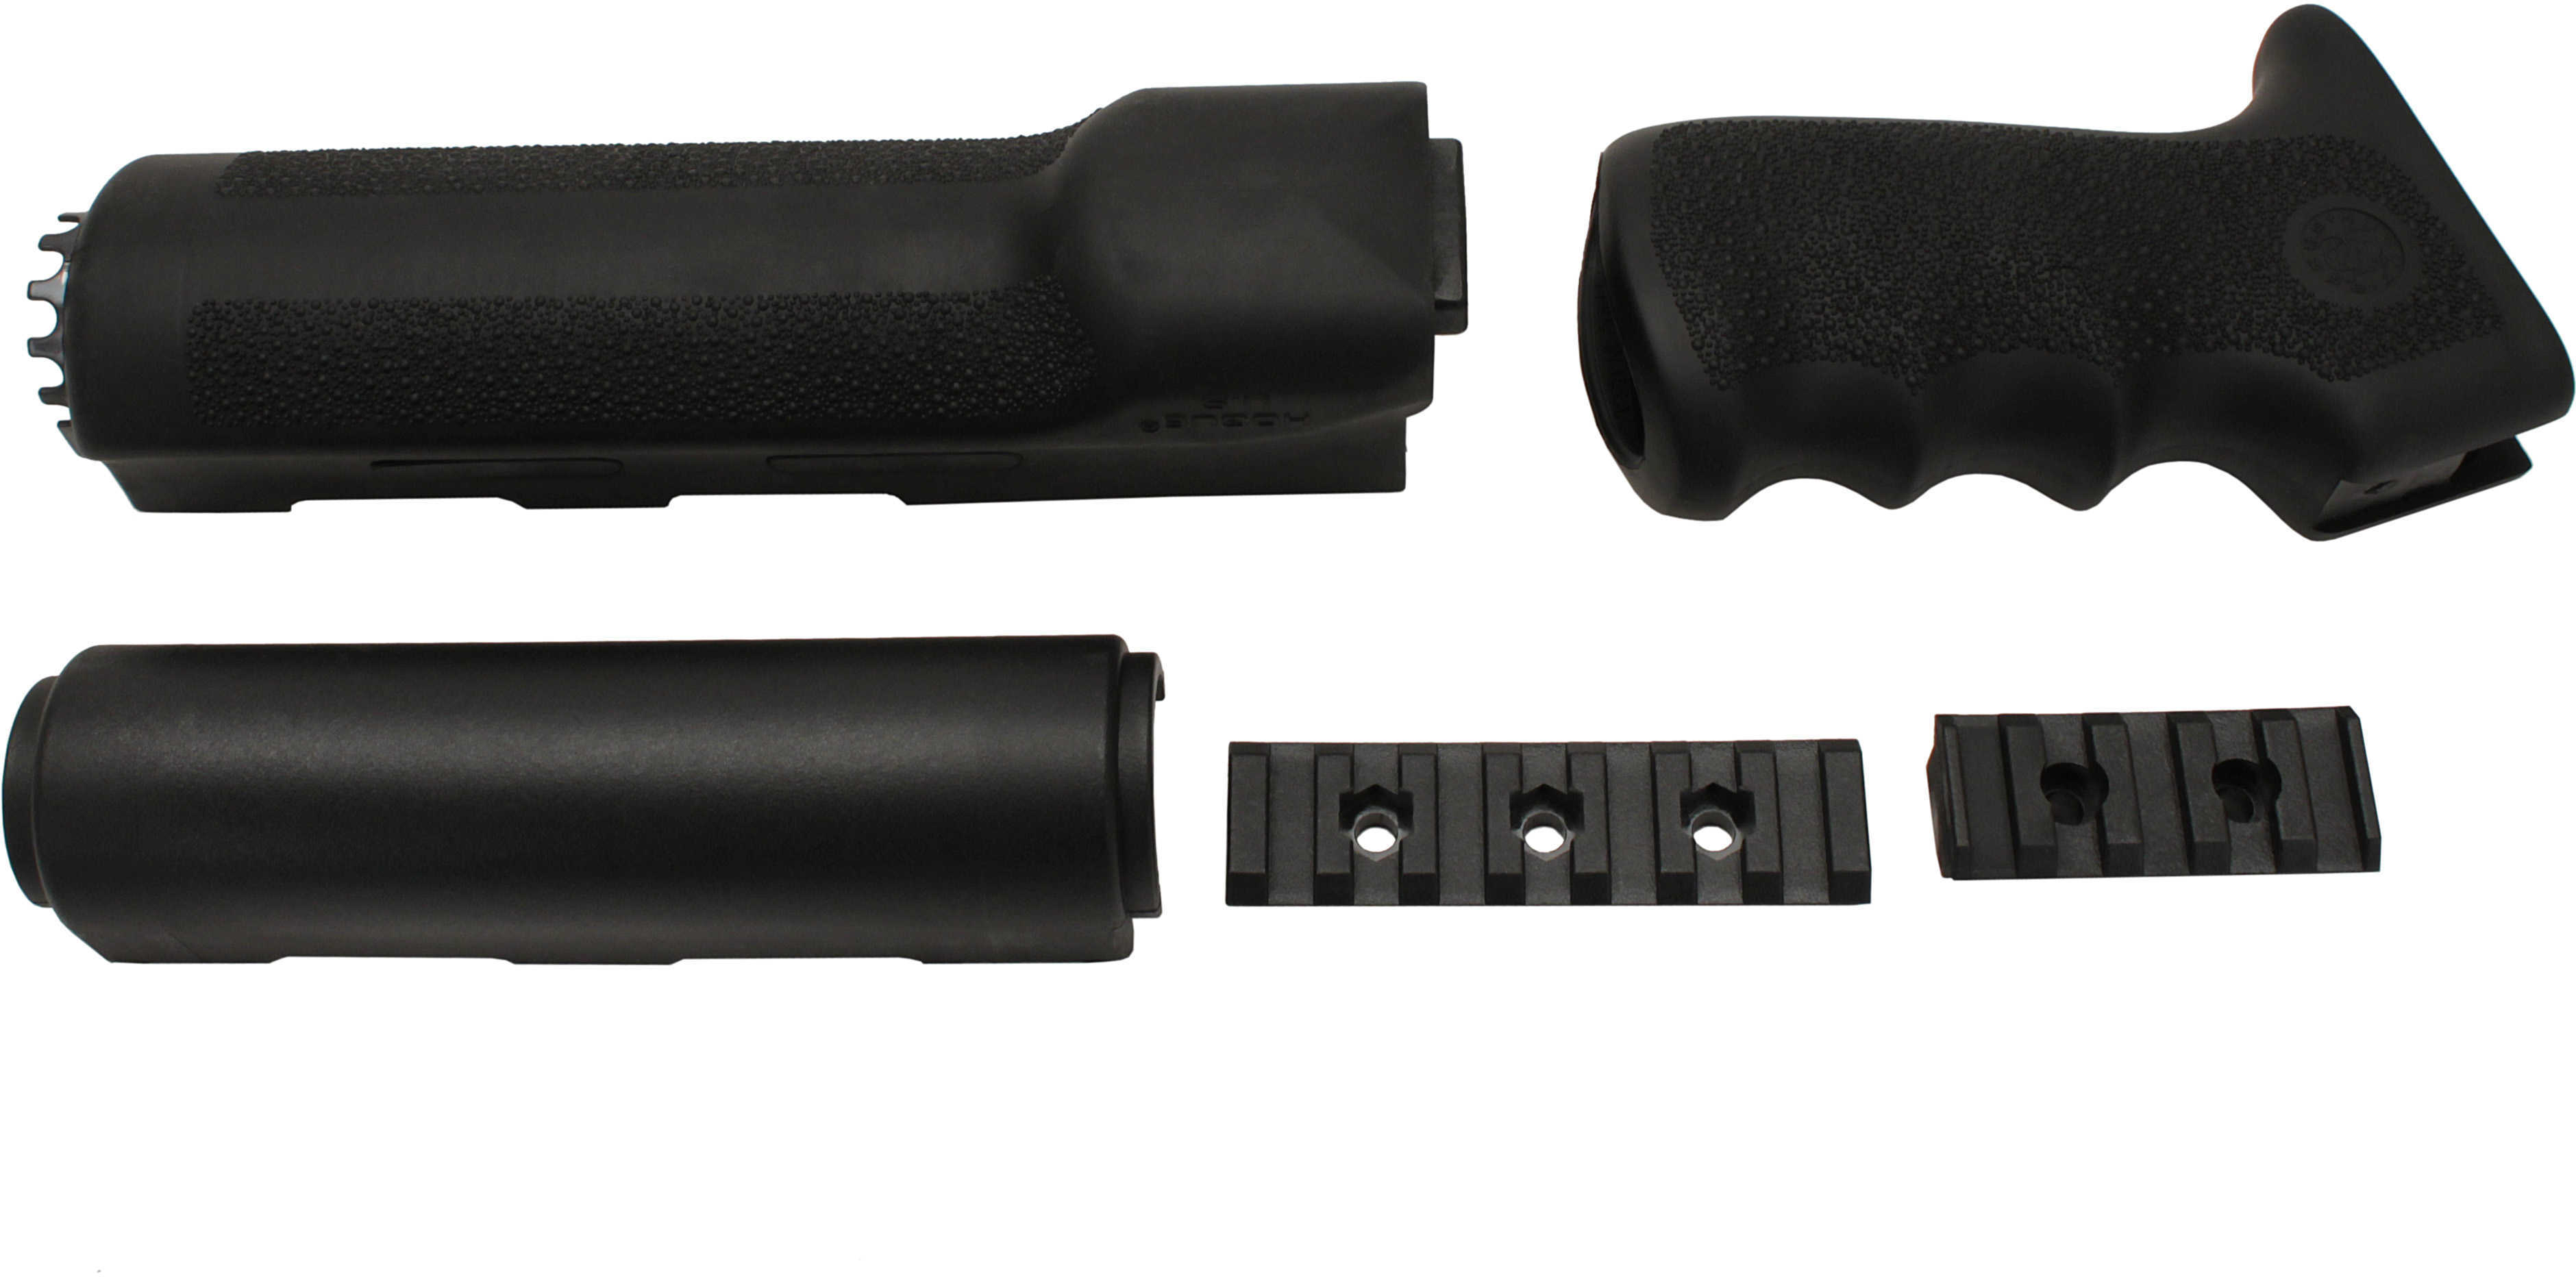 Hogue Grips Overmolded And Forend Kit Longer Yugo Version Fits AK-47 & AK-74 Variants Black Finish 74018